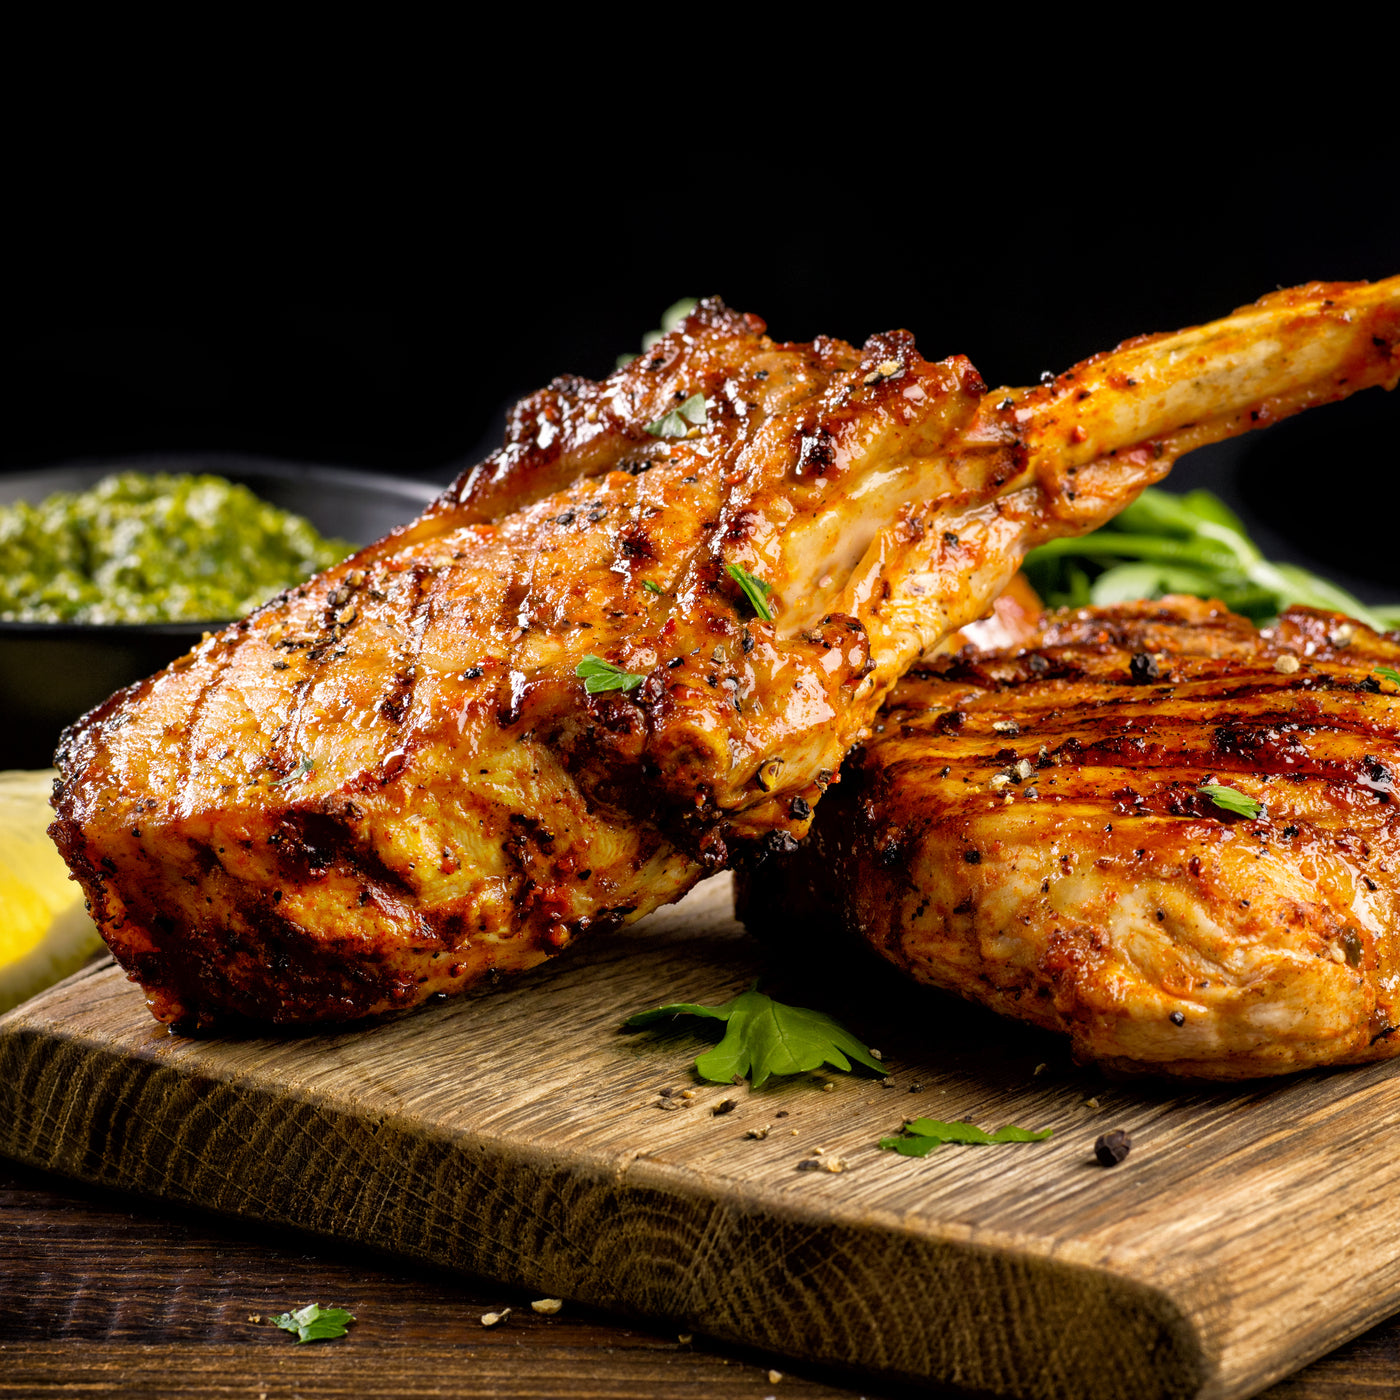 Buy best meats at Kolikof, as recommended by the best chefs in the world.